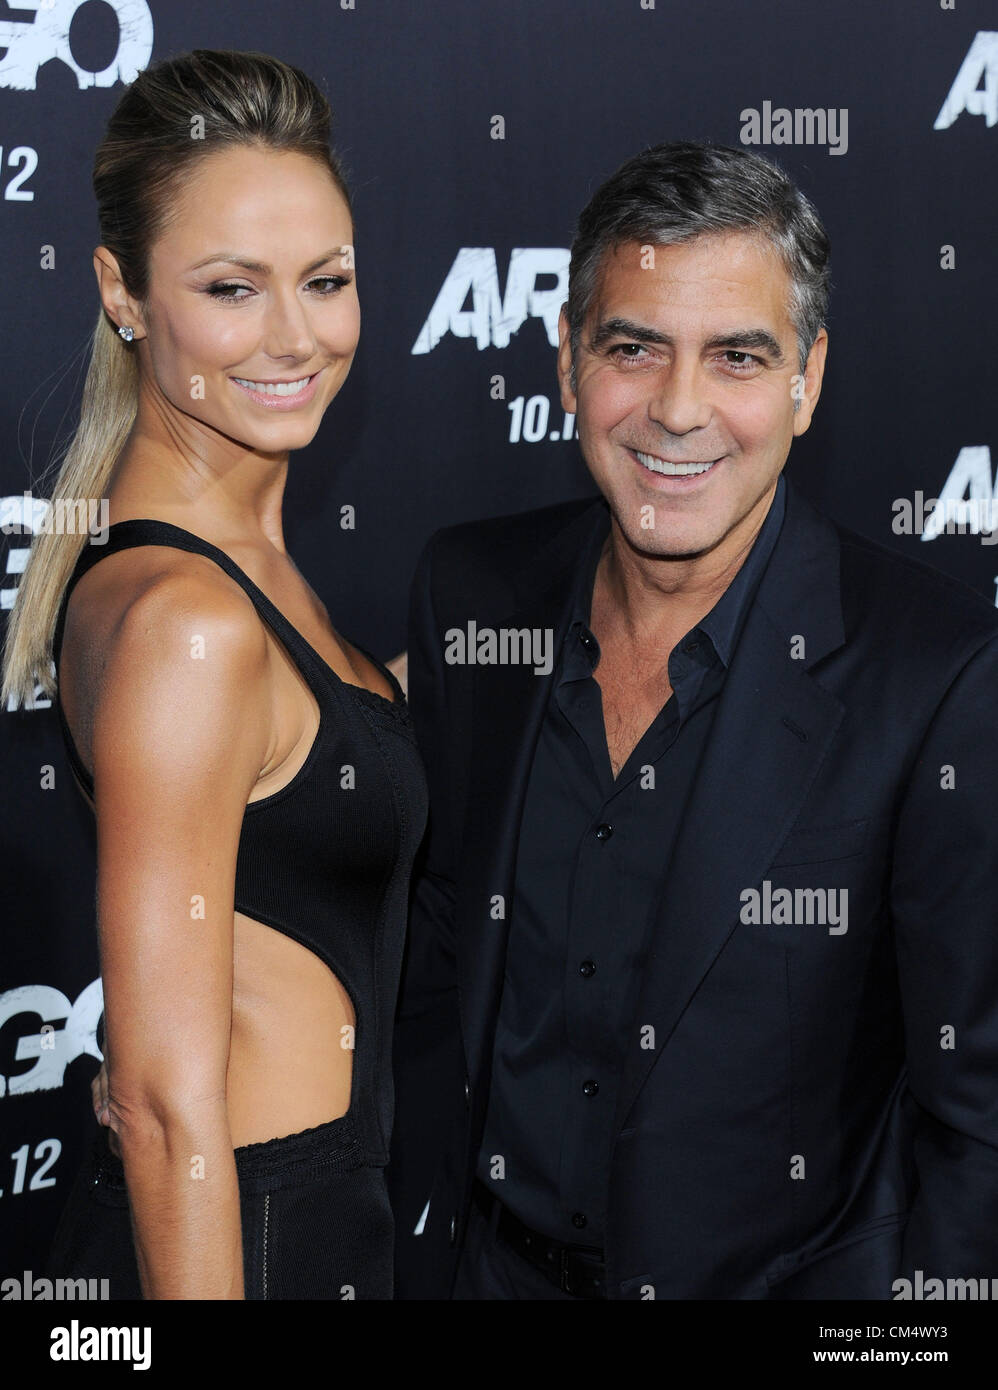 Stacy Keibler and George Clooney at the film premiere for 'Argo' in Beverly Hills, CA Oct 4th 2012. USA. Stock Photo